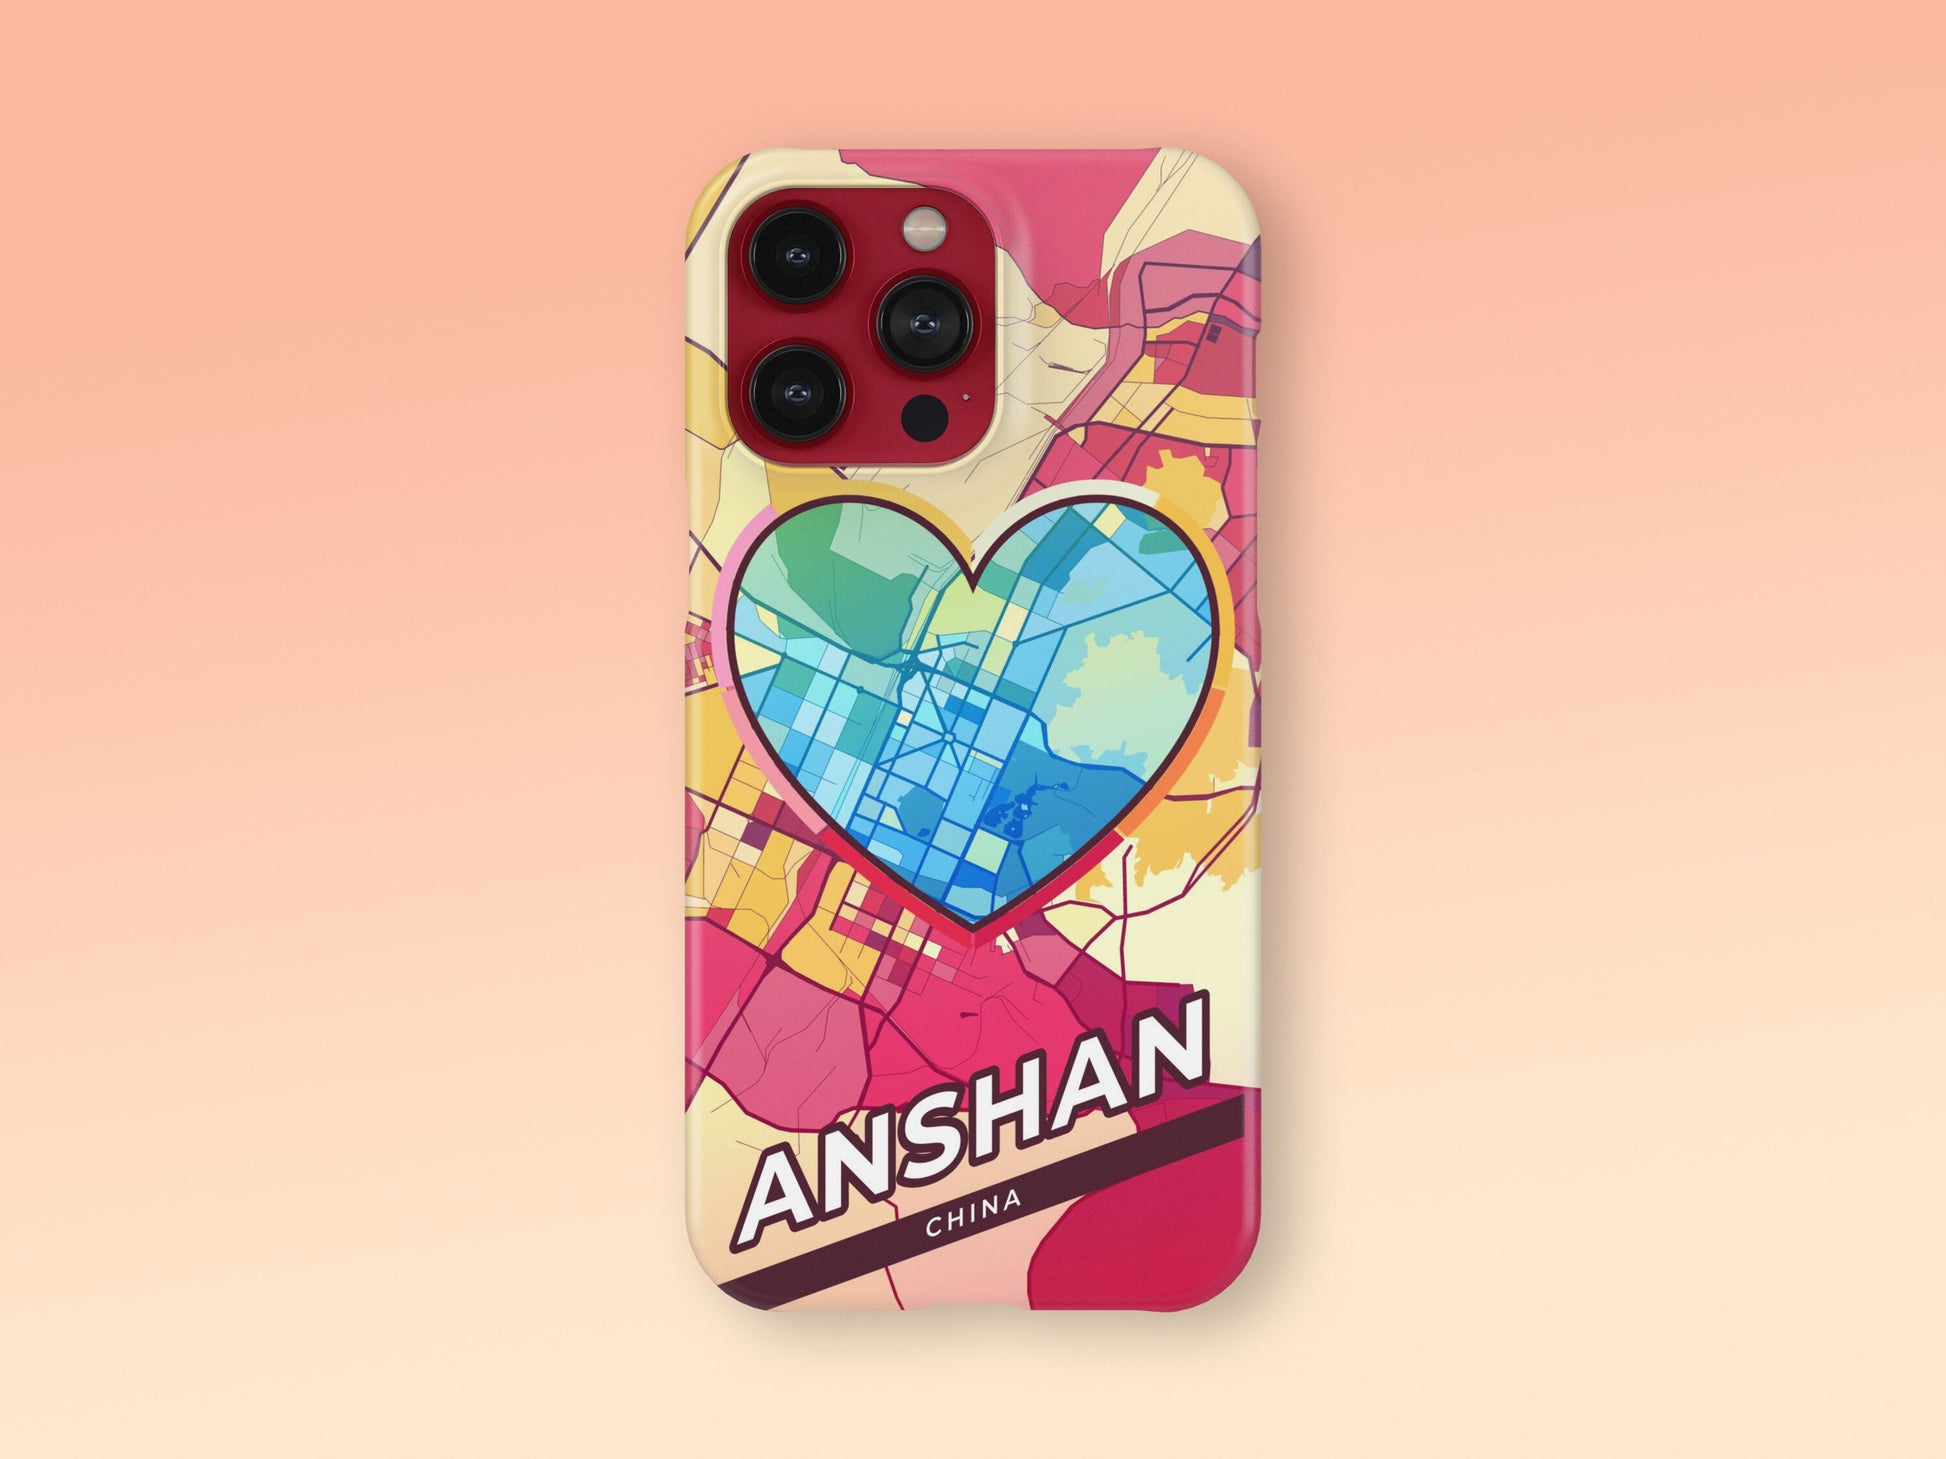 Anshan China slim phone case with colorful icon. Birthday, wedding or housewarming gift. Couple match cases. 2